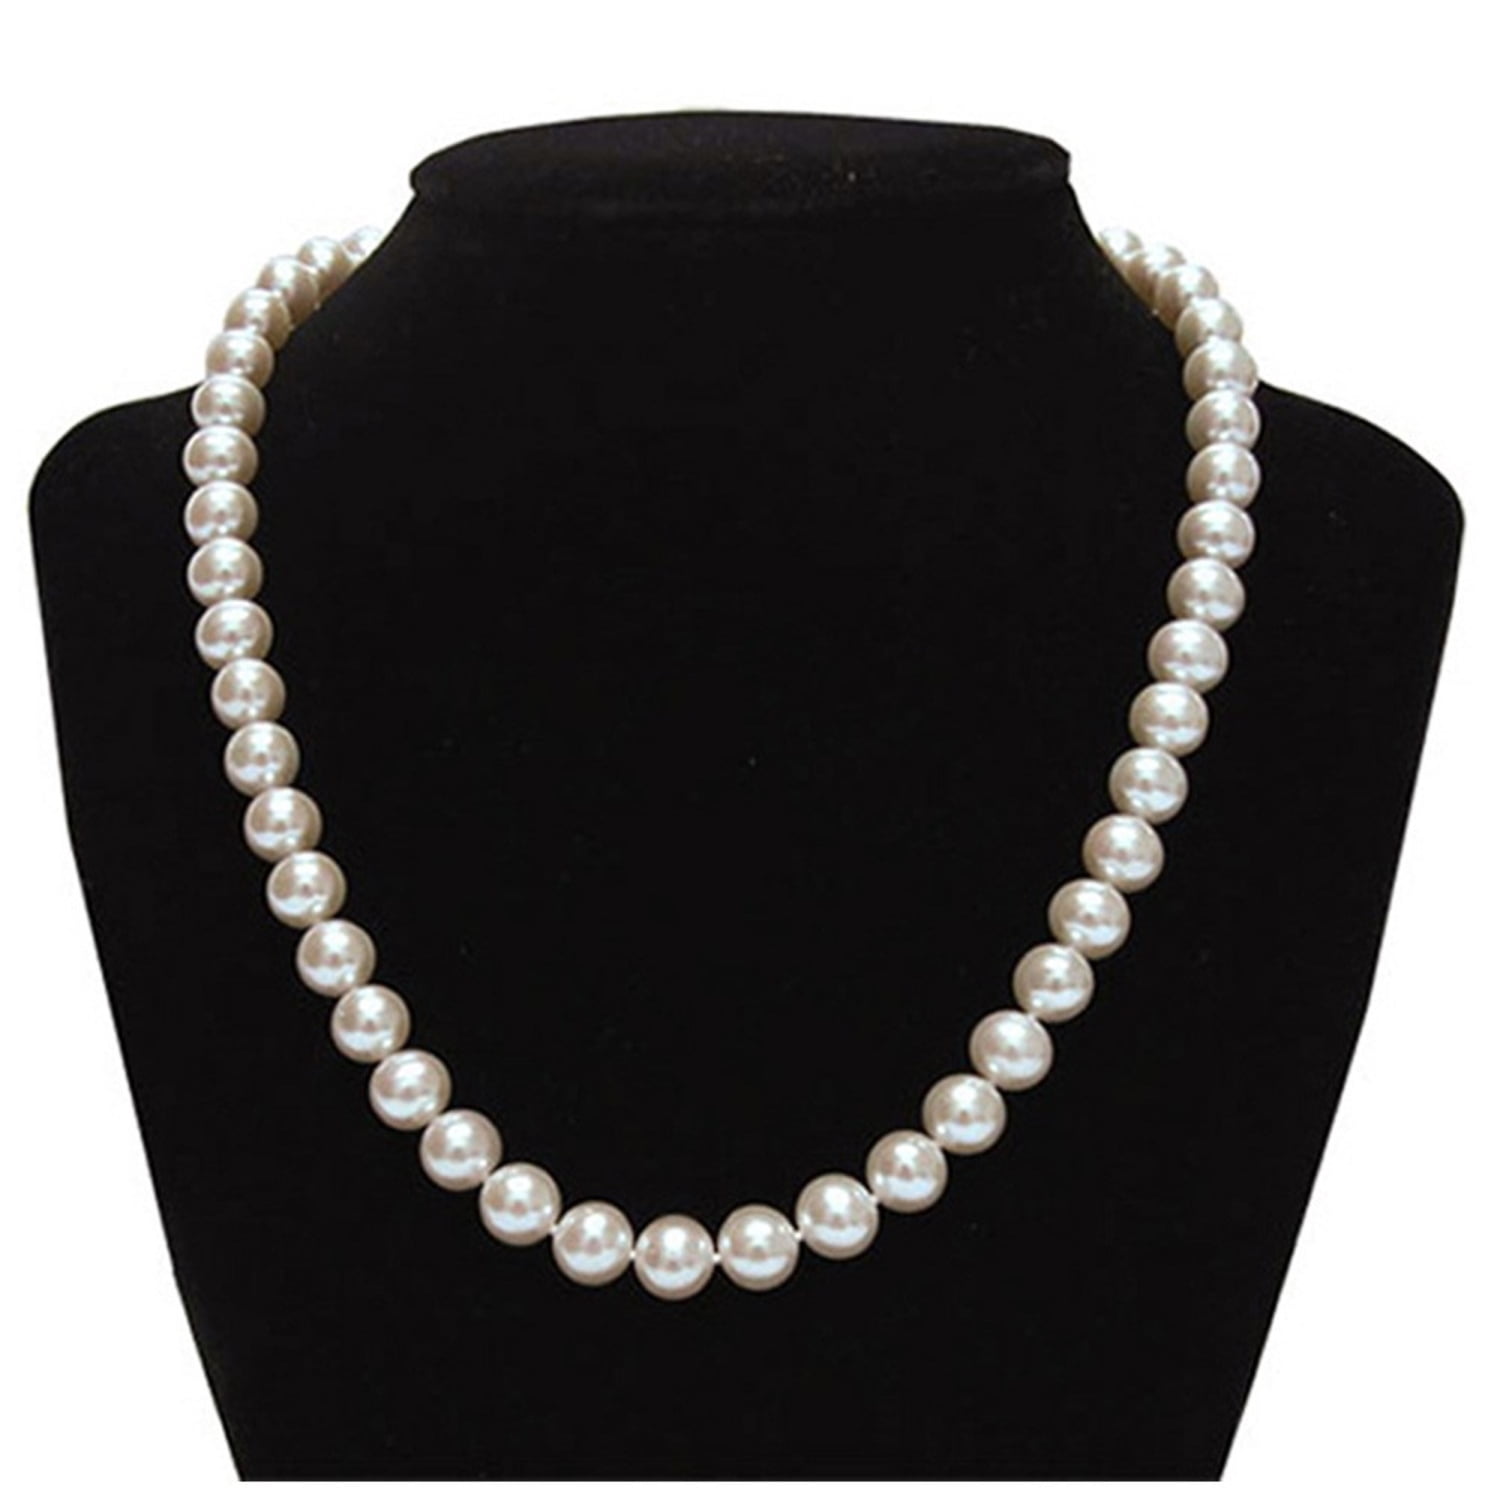 925 Sterling Silver Rhod-plat 10-11mm White Freshwater Cultured Pearl Necklace 17 Inch